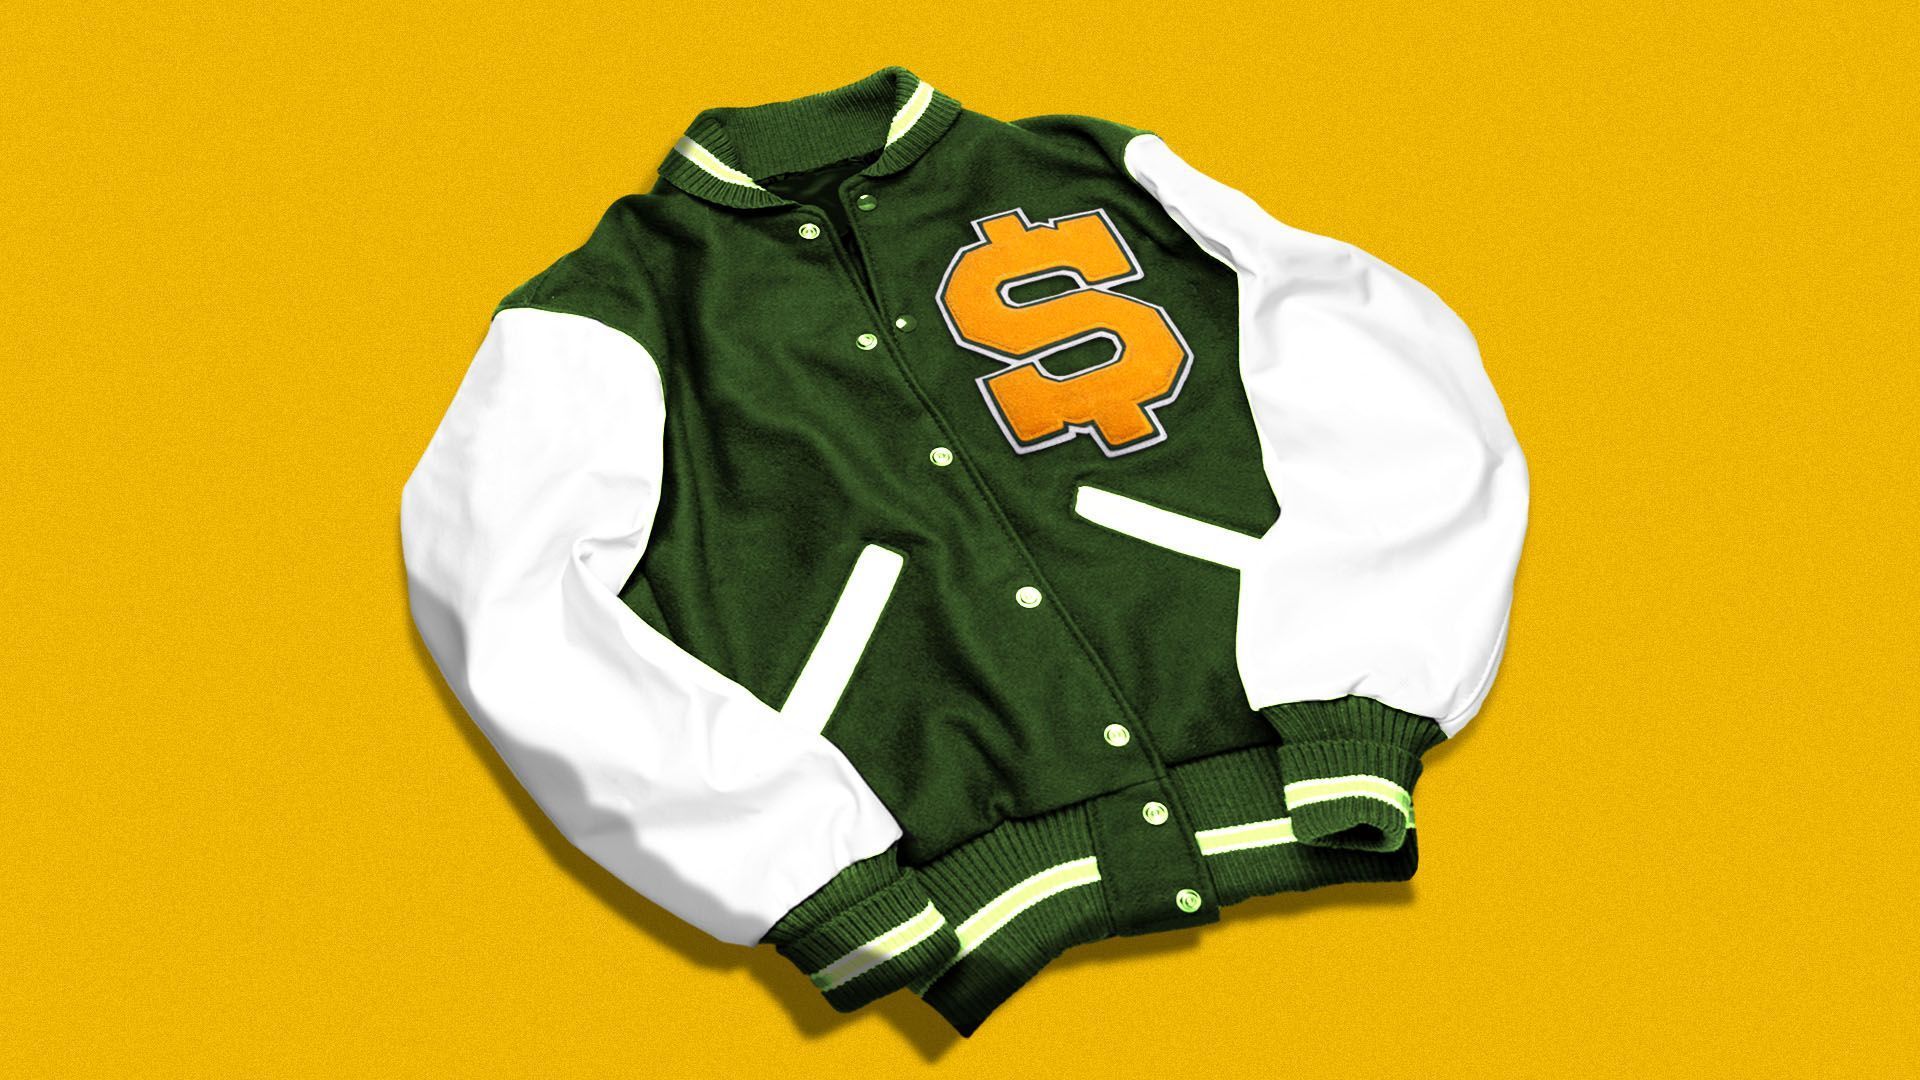 A varsity jacket with a dollar sign printed on it.